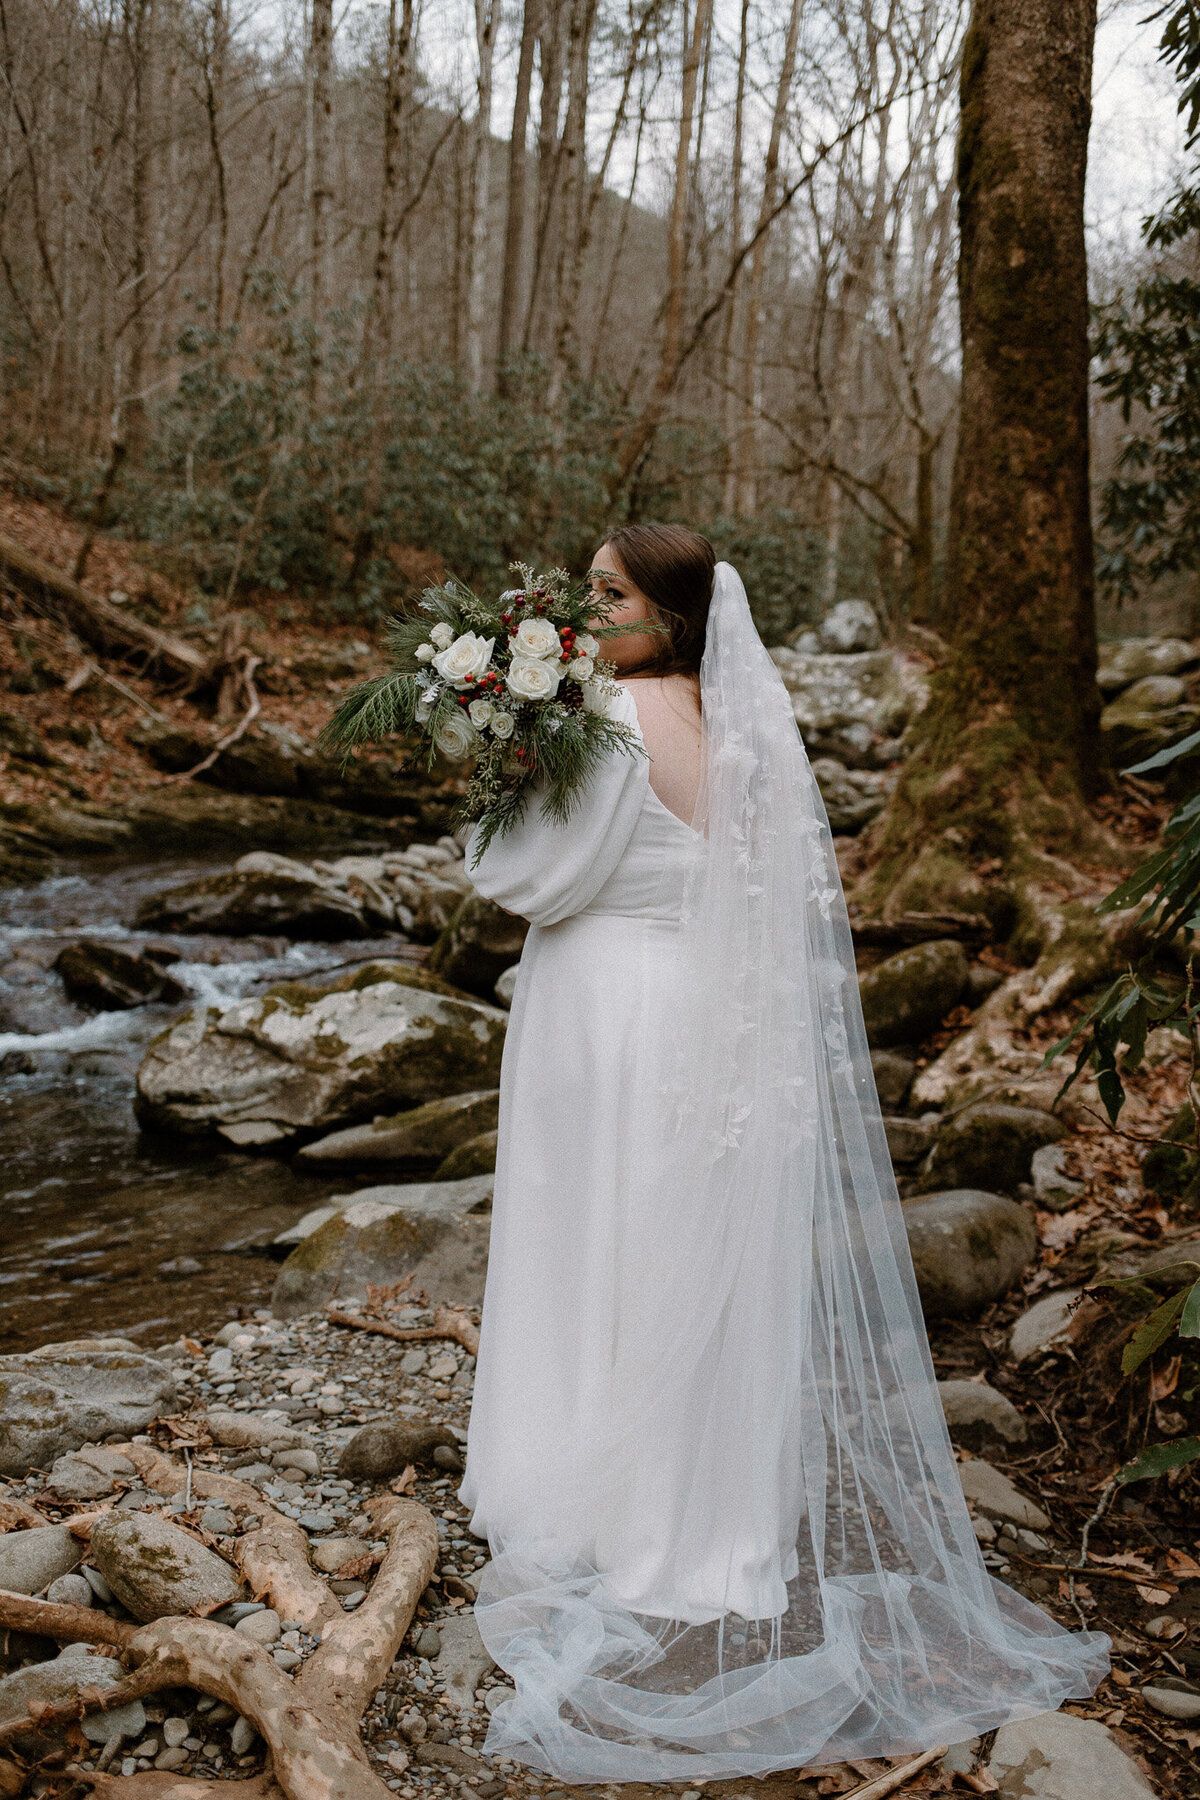 Bridal portraits at Ely's Mill in Tennessee.